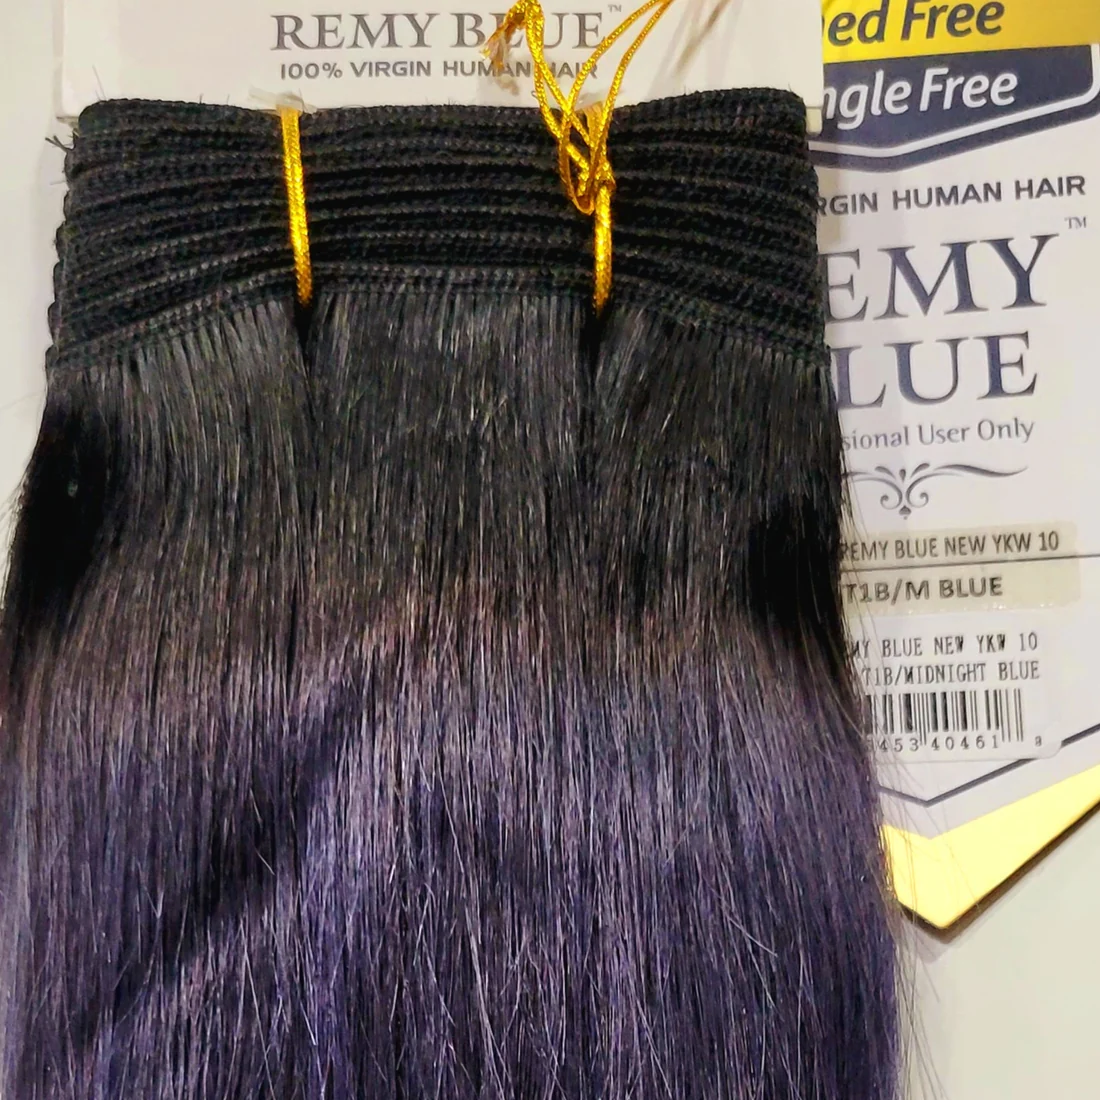 Remy Blue Human Hair New Yaky 12"